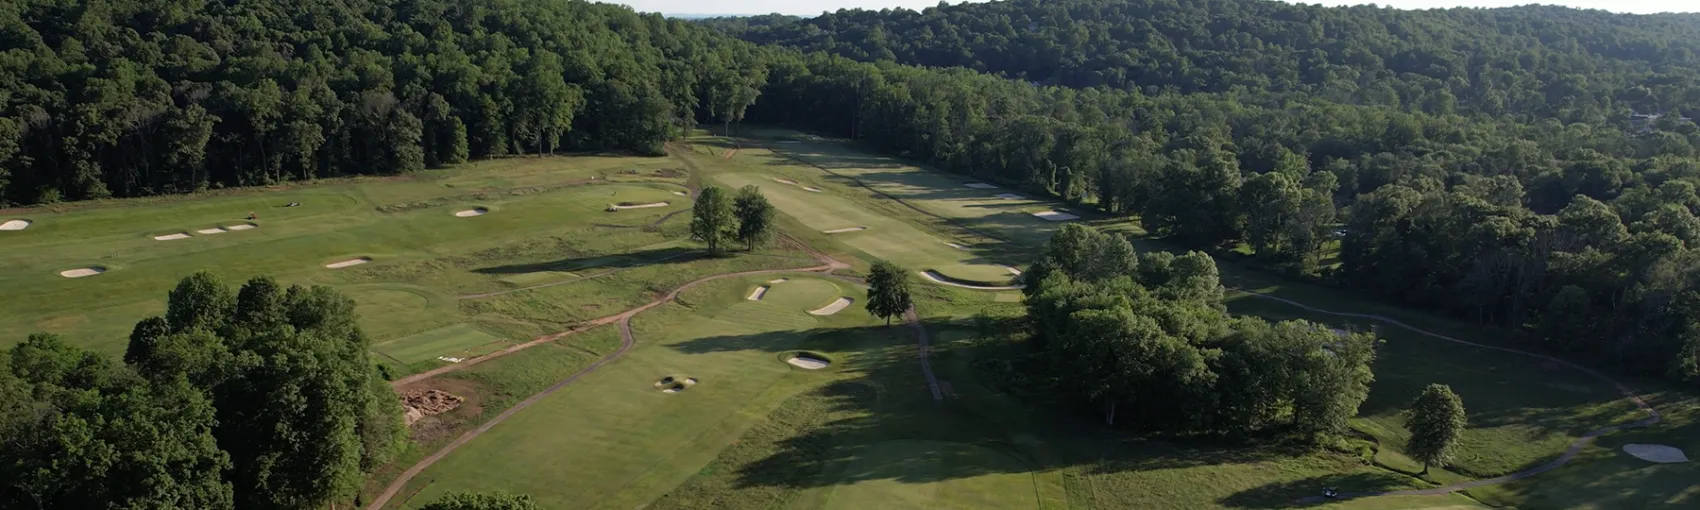 PREVIEW: 99th Women’s Amateur & 11th Women’s Mid-Amateur Championships at Watchung Valley Golf Club